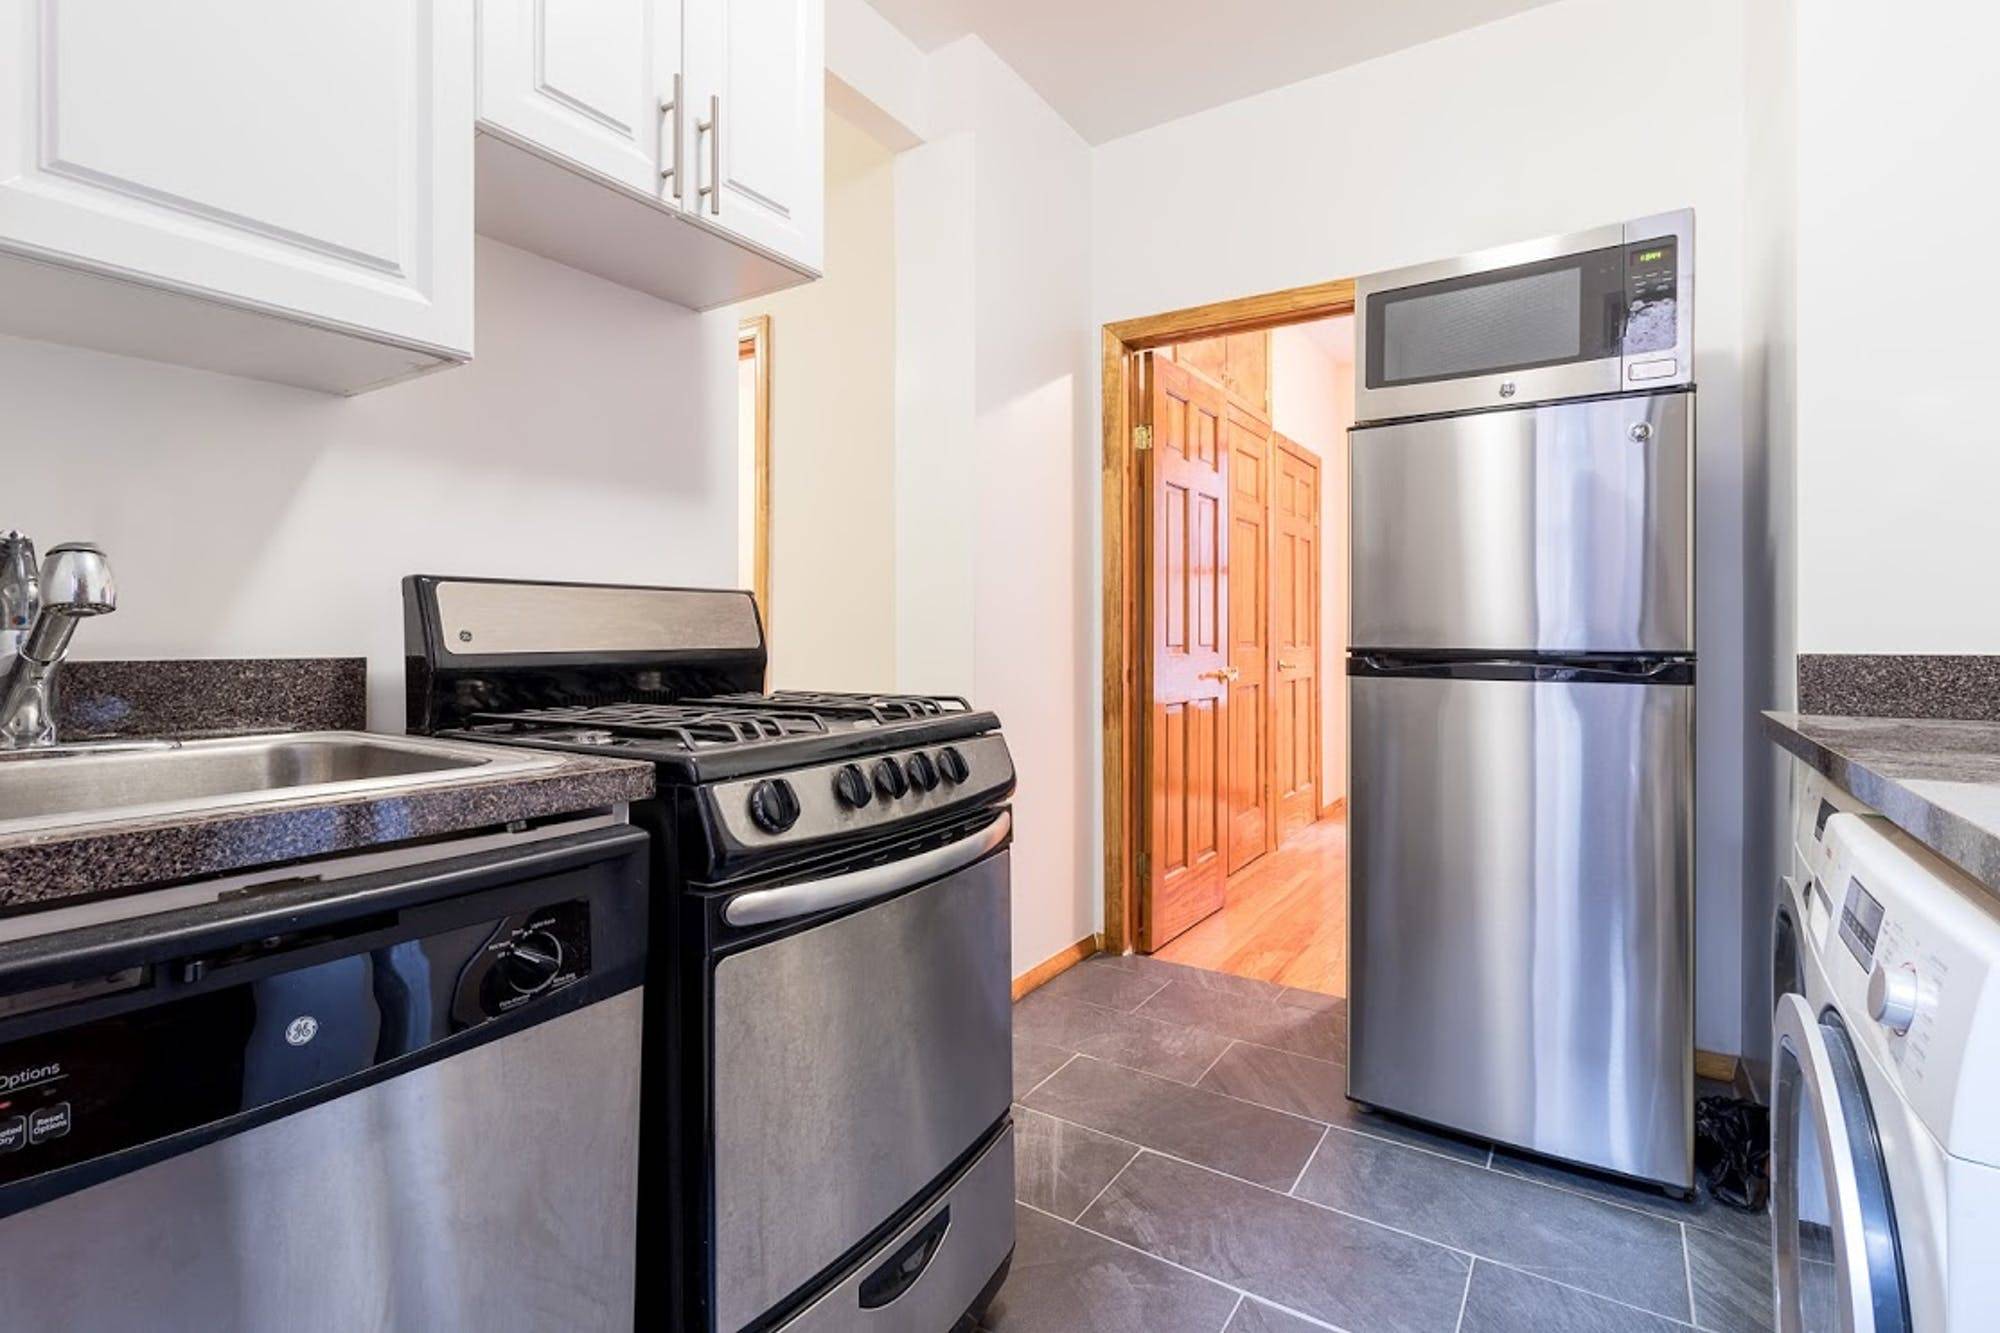 CHARMING TWO BED IN THE HEART OF WASHINGTON HEIGHTS Just a few blocks from the A, C, and 1 trains.